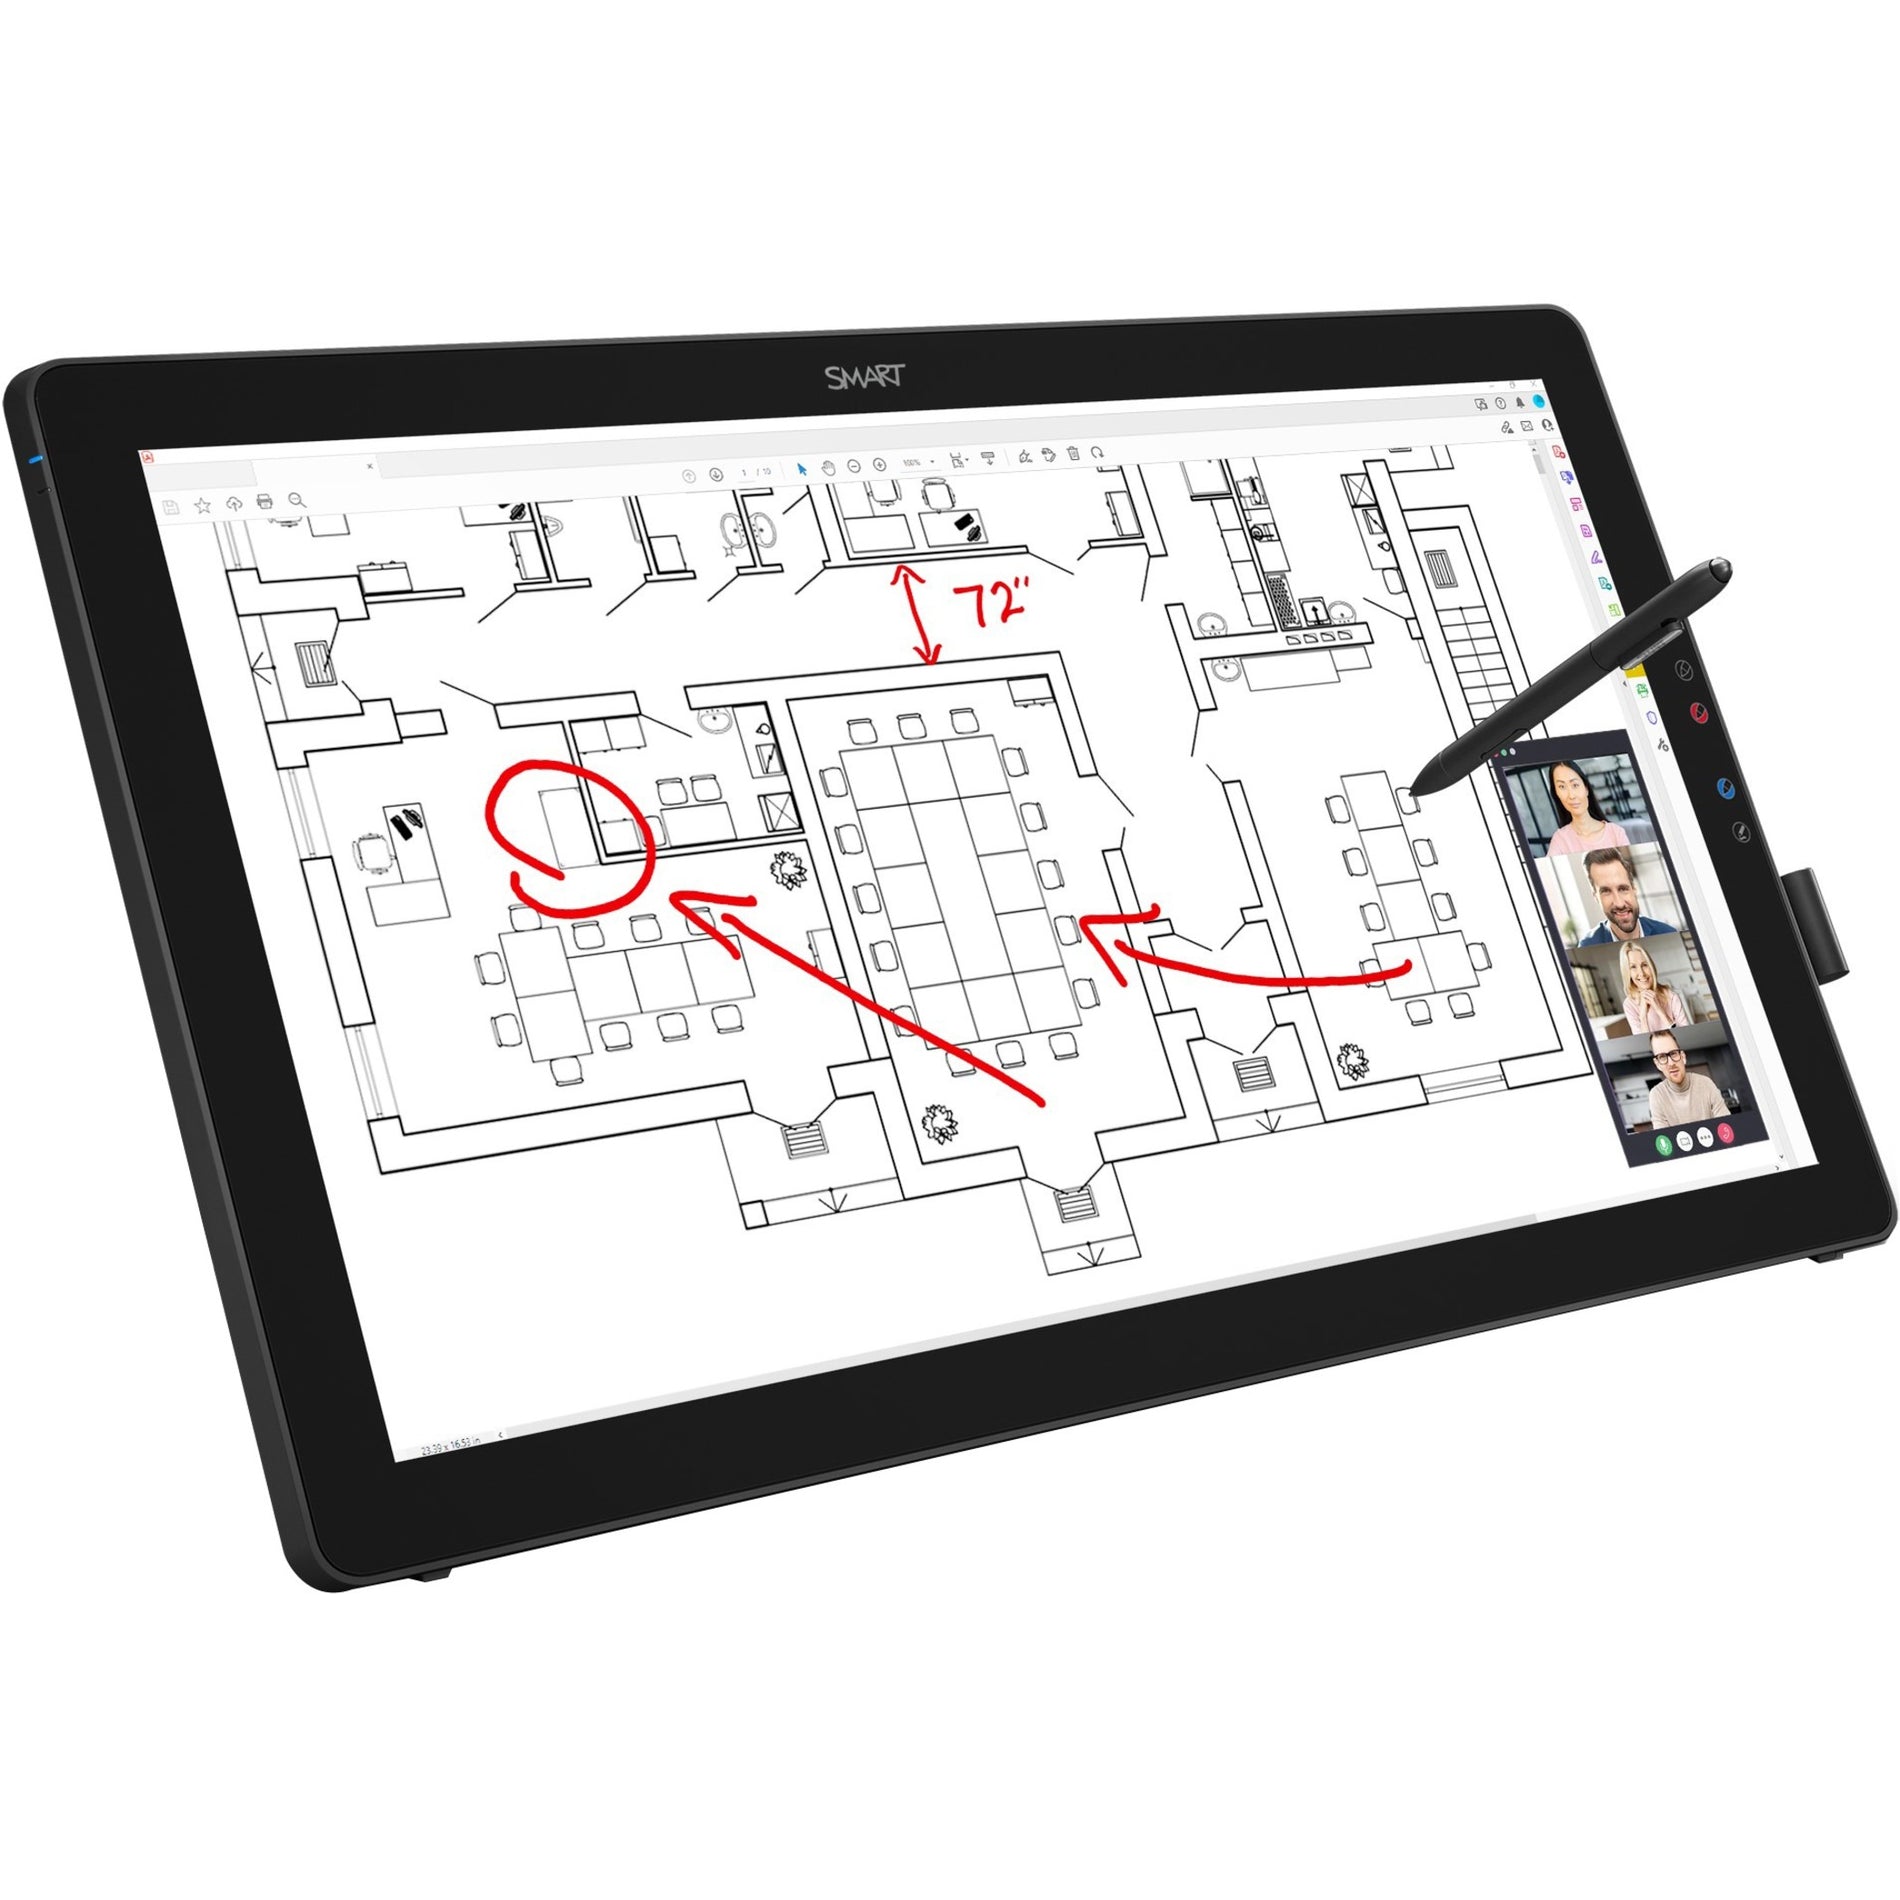 SMART SP624 Podium Interactive Pen Display - Collaborate and Create with Ease